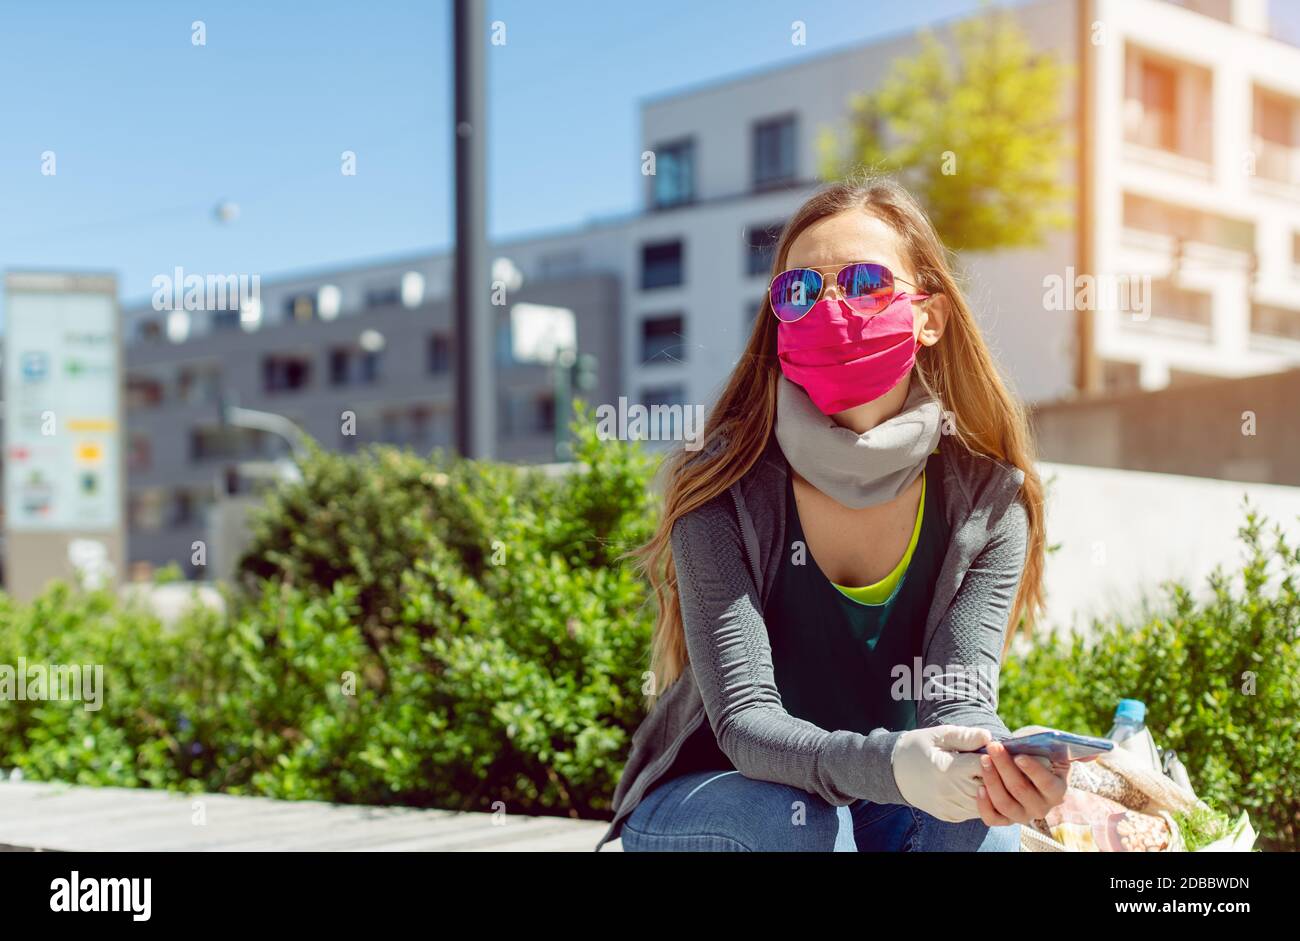 Woman with face mask sitting outside as lockdown opens and relaxes Stock Photo